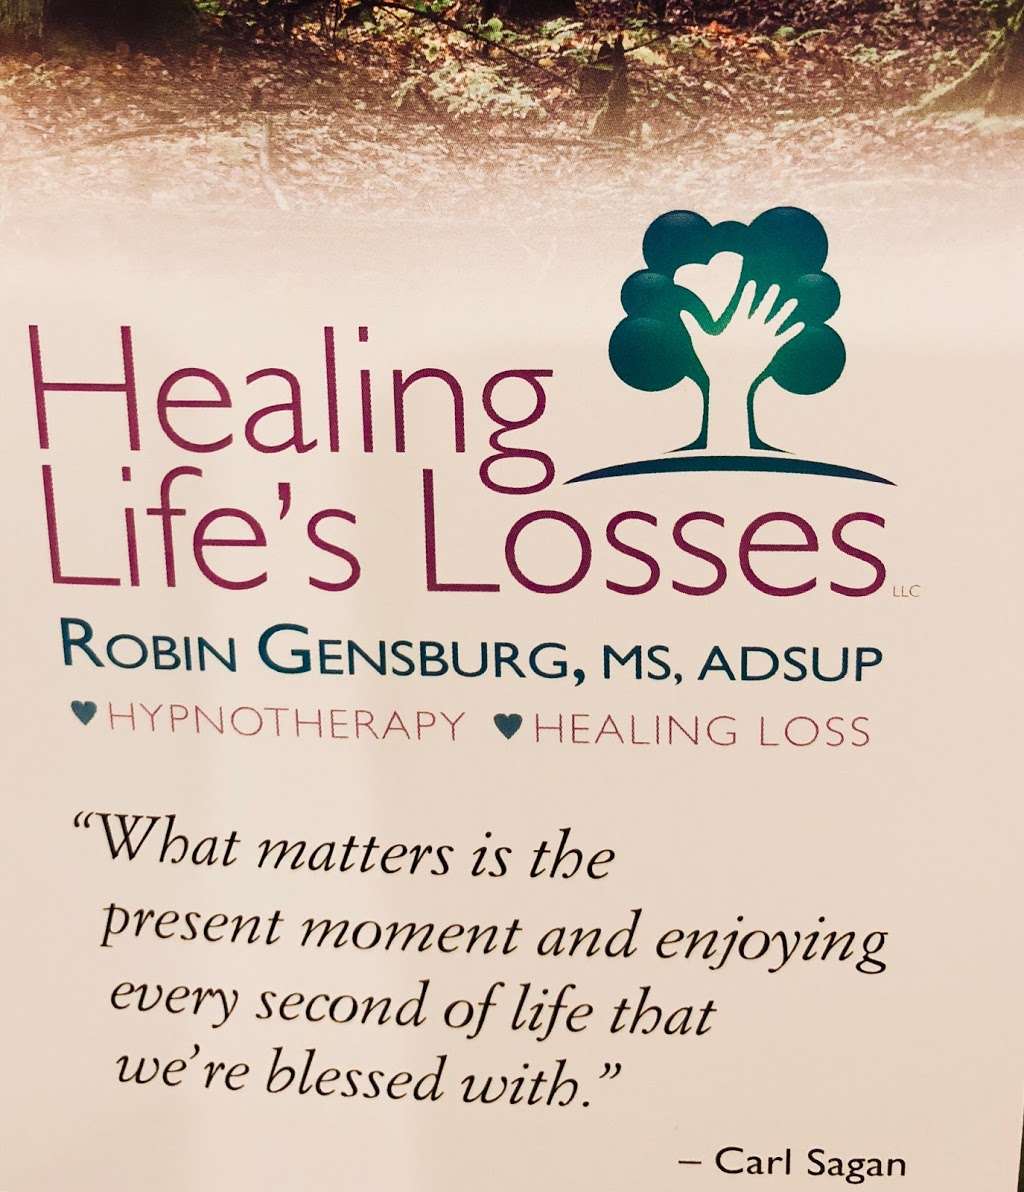 Healing Lifes Losses | 2 East Ave #209, Larchmont, NY 10538 | Phone: (914) 450-8877